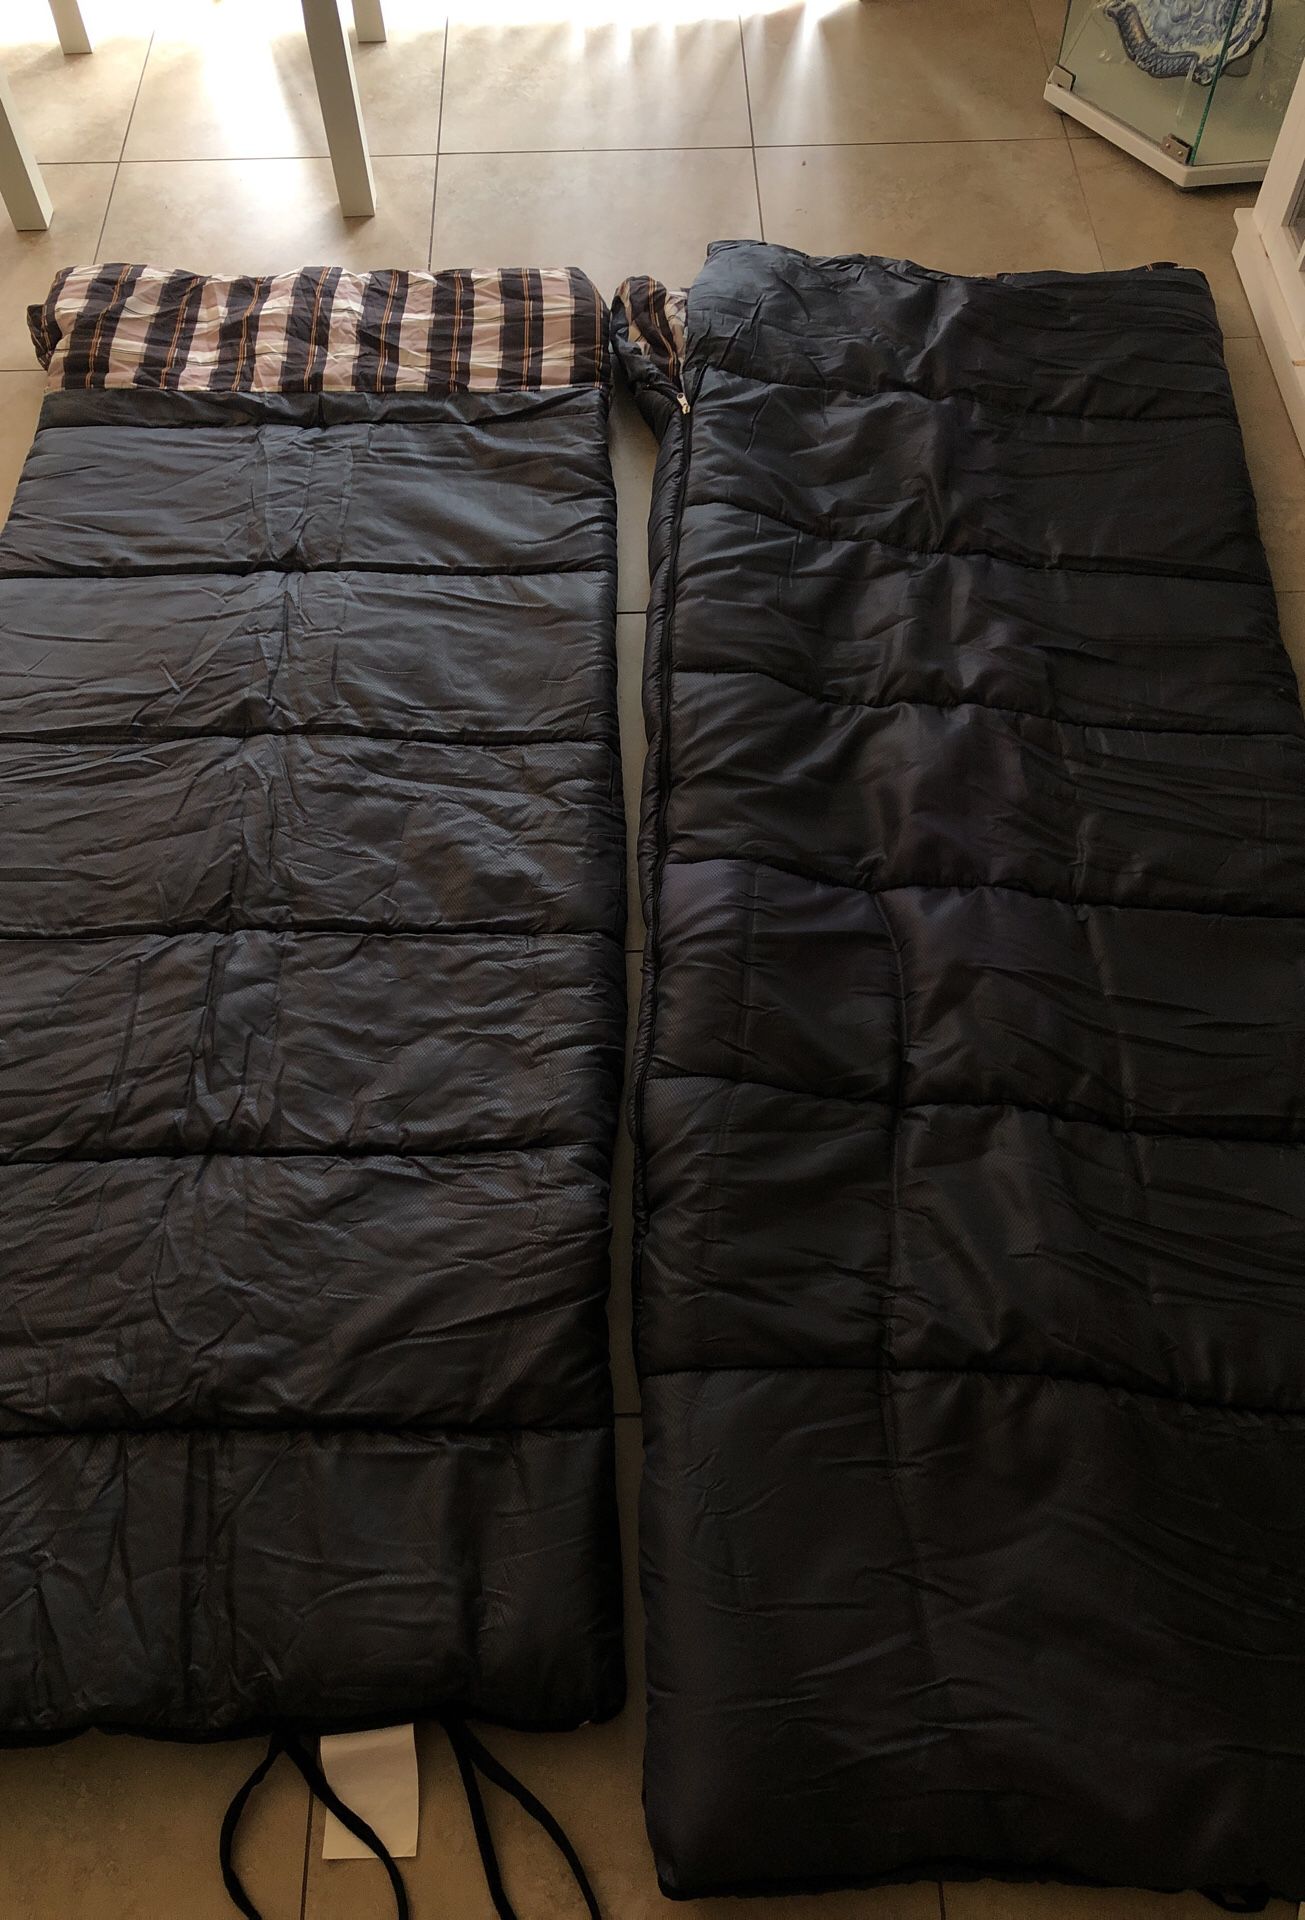 Sleeping bags for camping